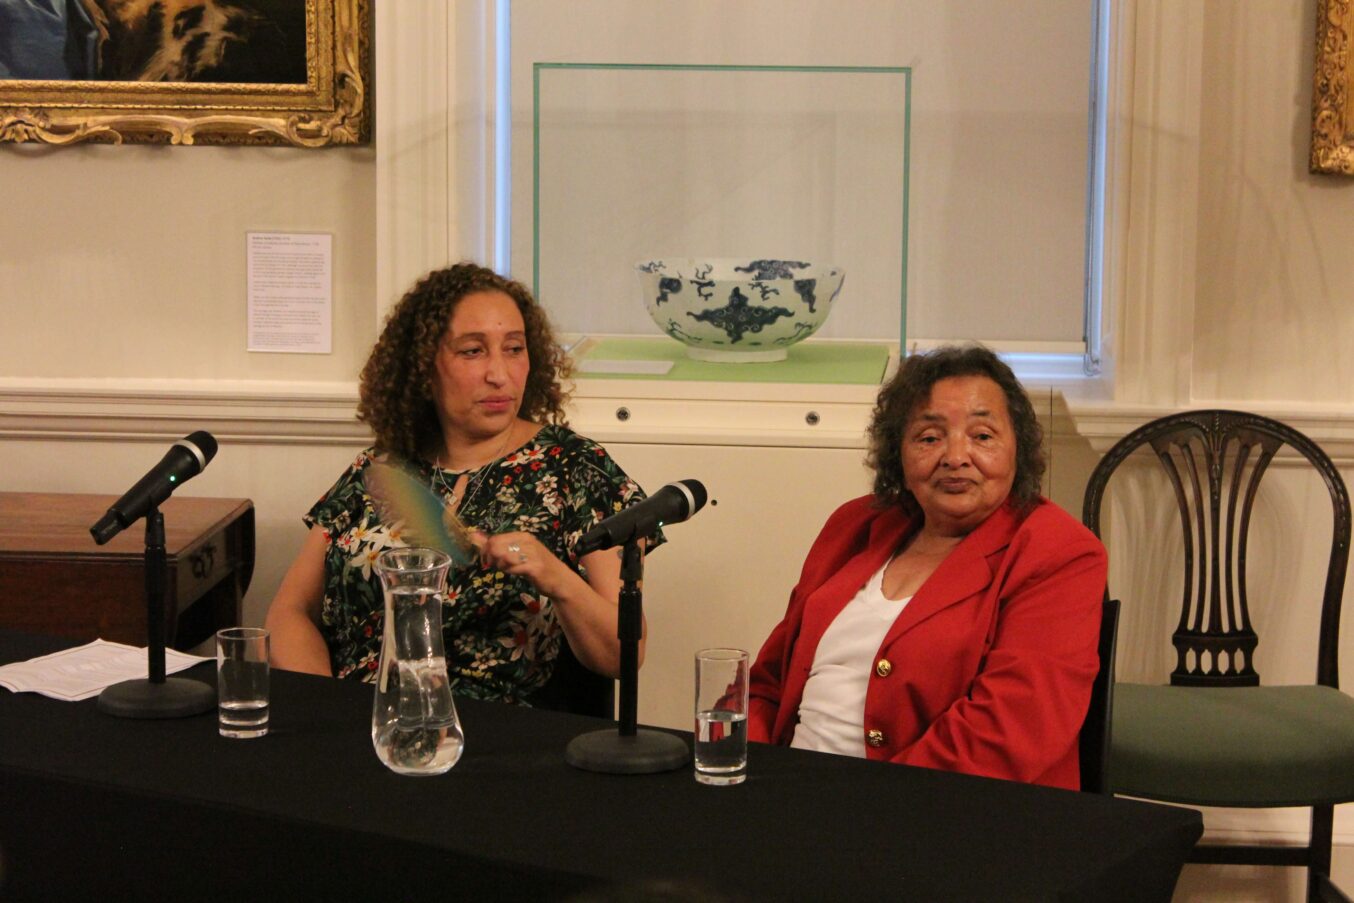 E.L. Norry and Ann Evans side by side at a panel discussion